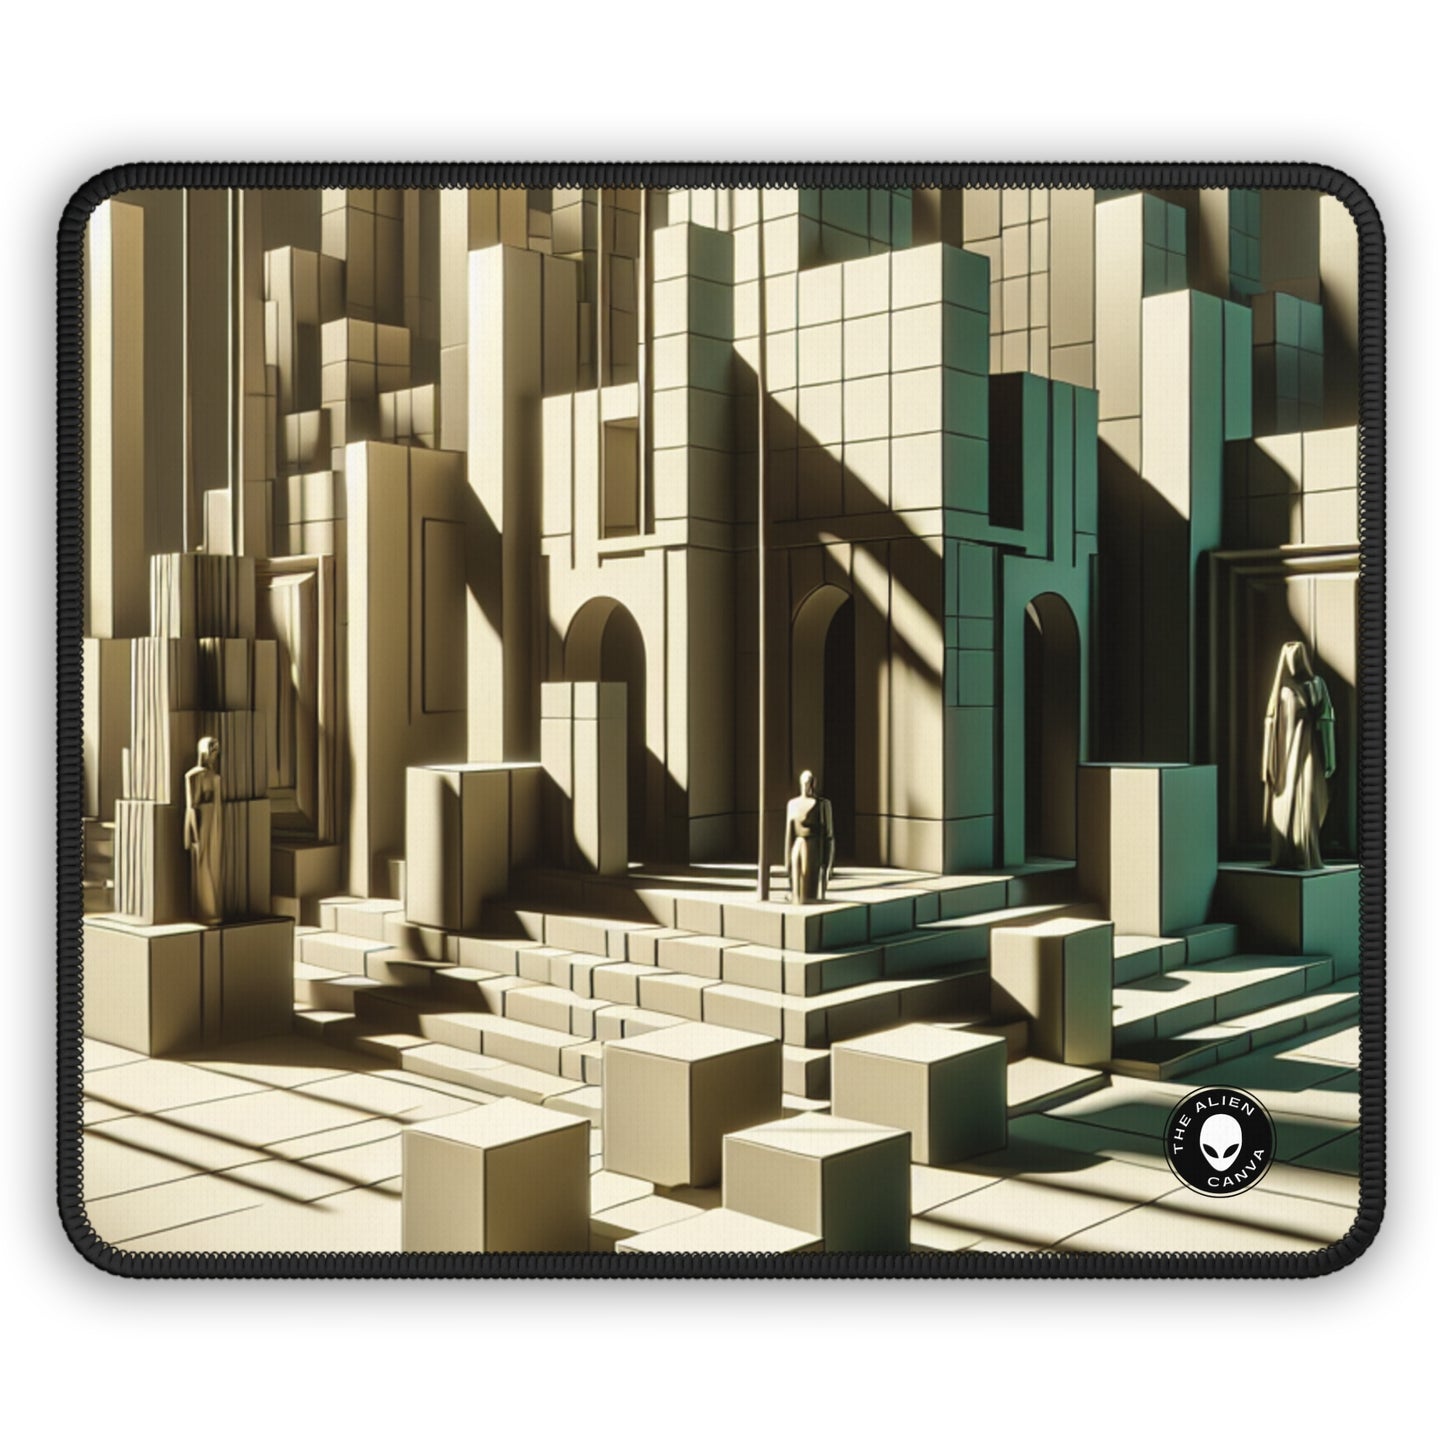 "Surreal Symphony: A Metaphysical Dreamworld" - The Alien Gaming Mouse Pad Metaphysical Art